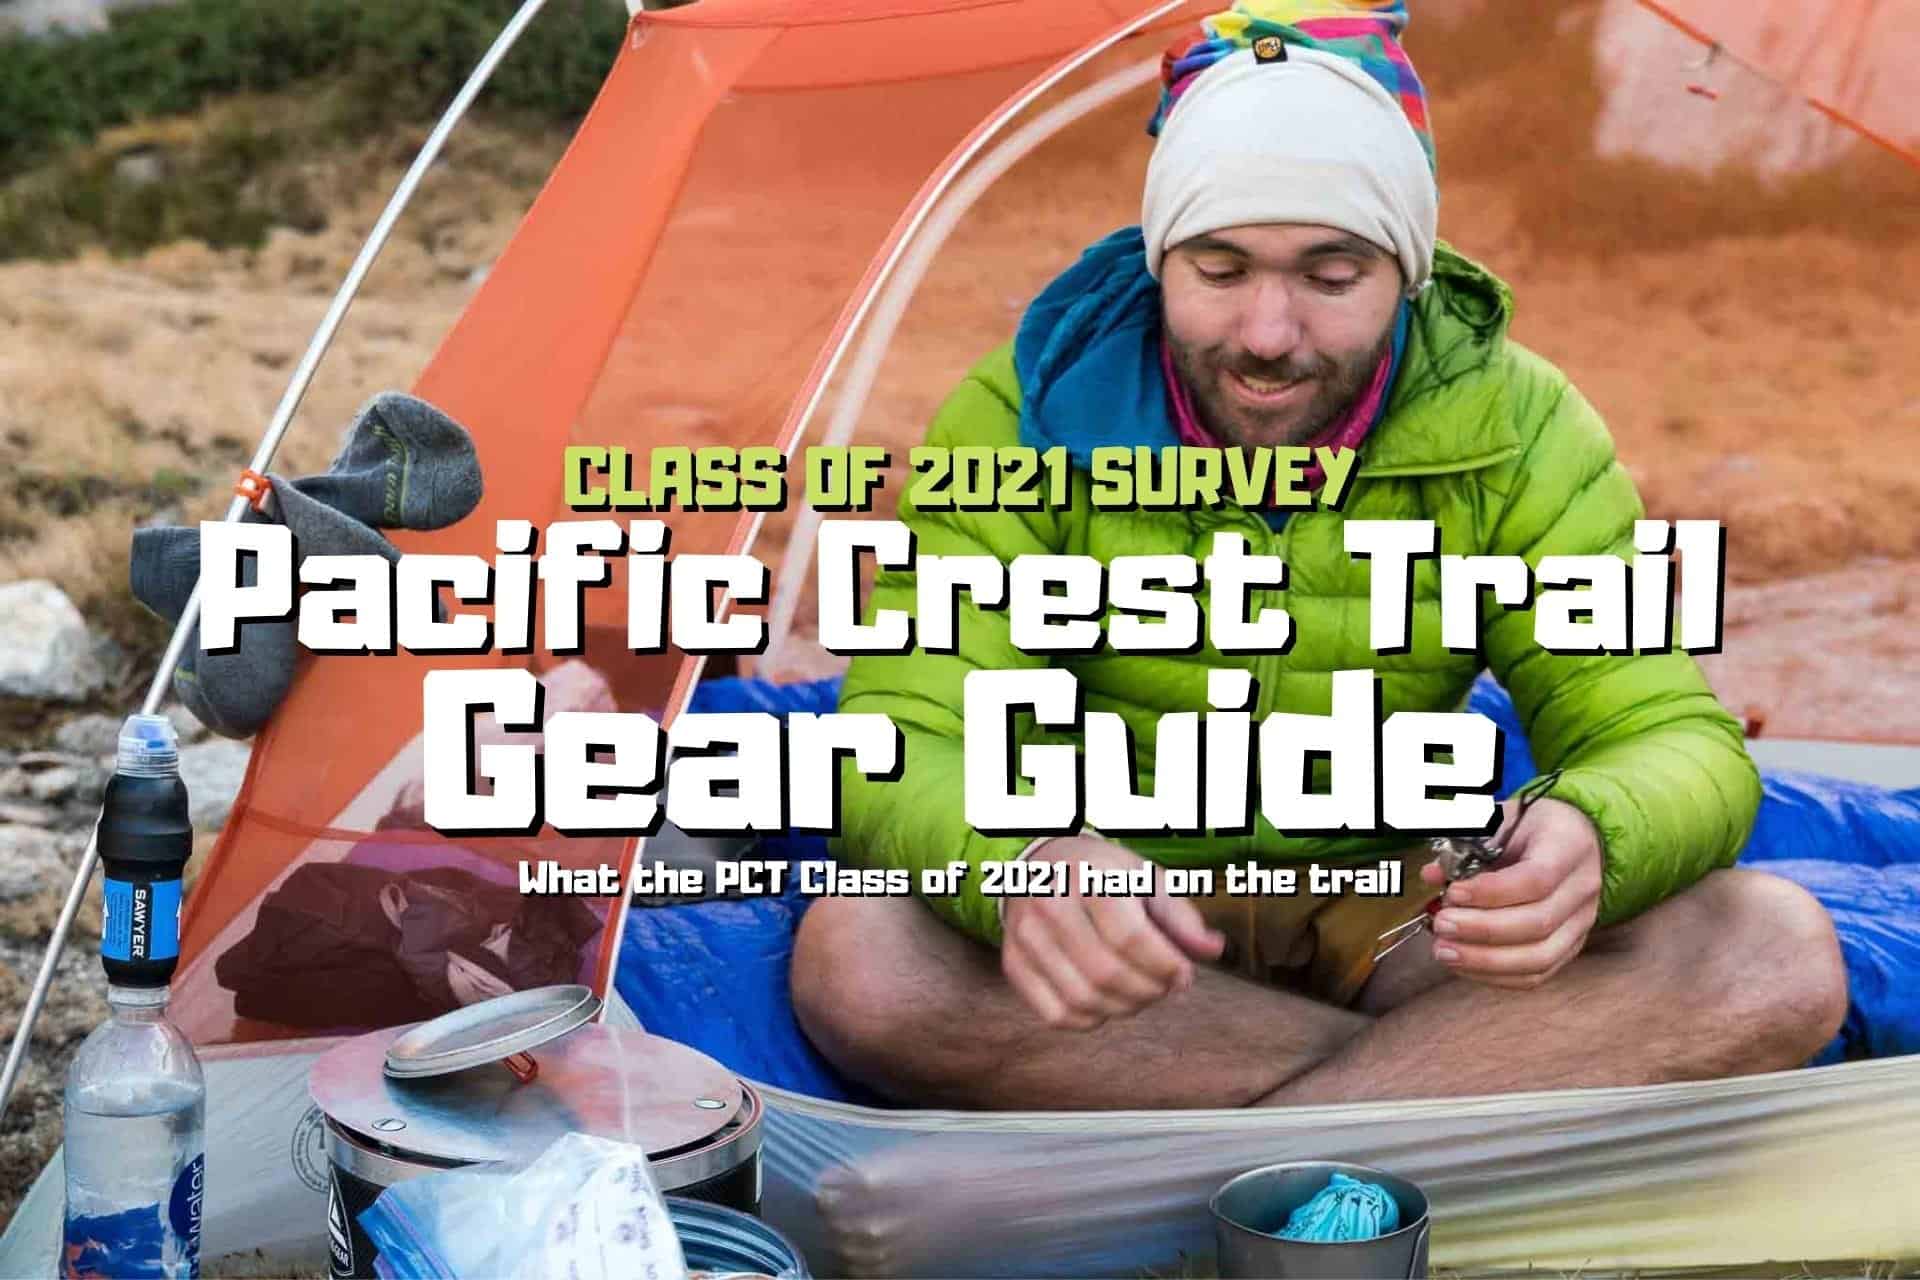 The Pacific Crest Trail Gear Guide: Class of 2021 Survey